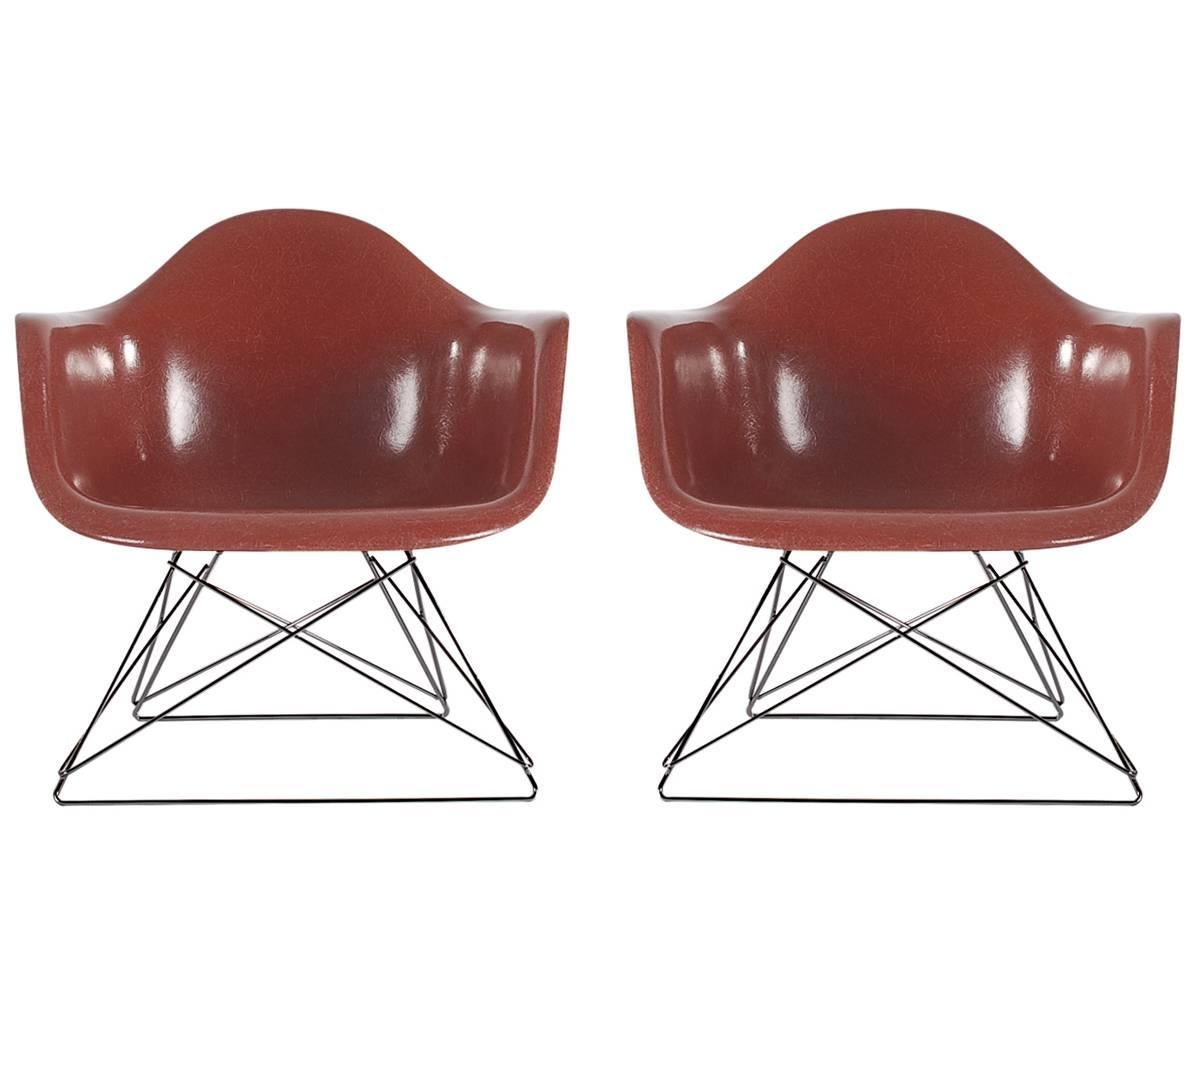 Here we have an iconic design classic from the Mid-Century Modern period. This vintage fiberglass shell chair was designed by Charles Eames and produced by Herman Miller, circa 1972. The chair seats are vintage and the low sitting cats cradle bases